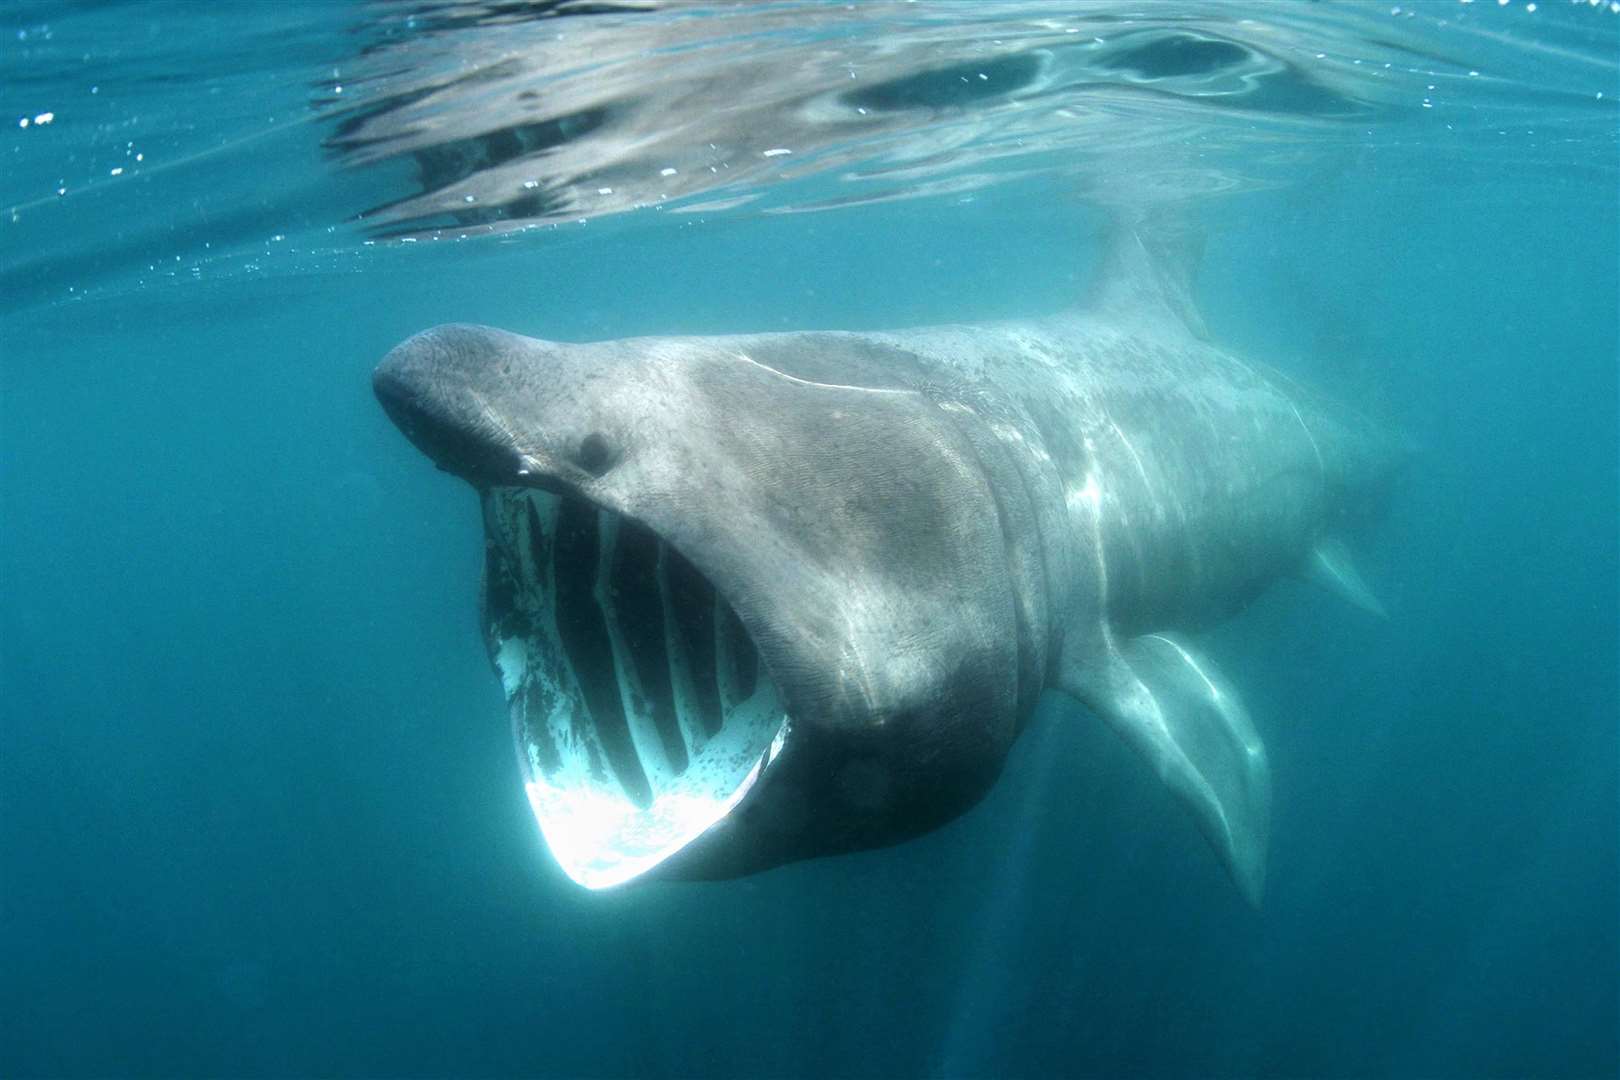 Basking sharks feed off plankton and many are seen off the west coast of Scotland each year. Picture: Simon Burt/westcountryphotographers.com/Adobe Stock